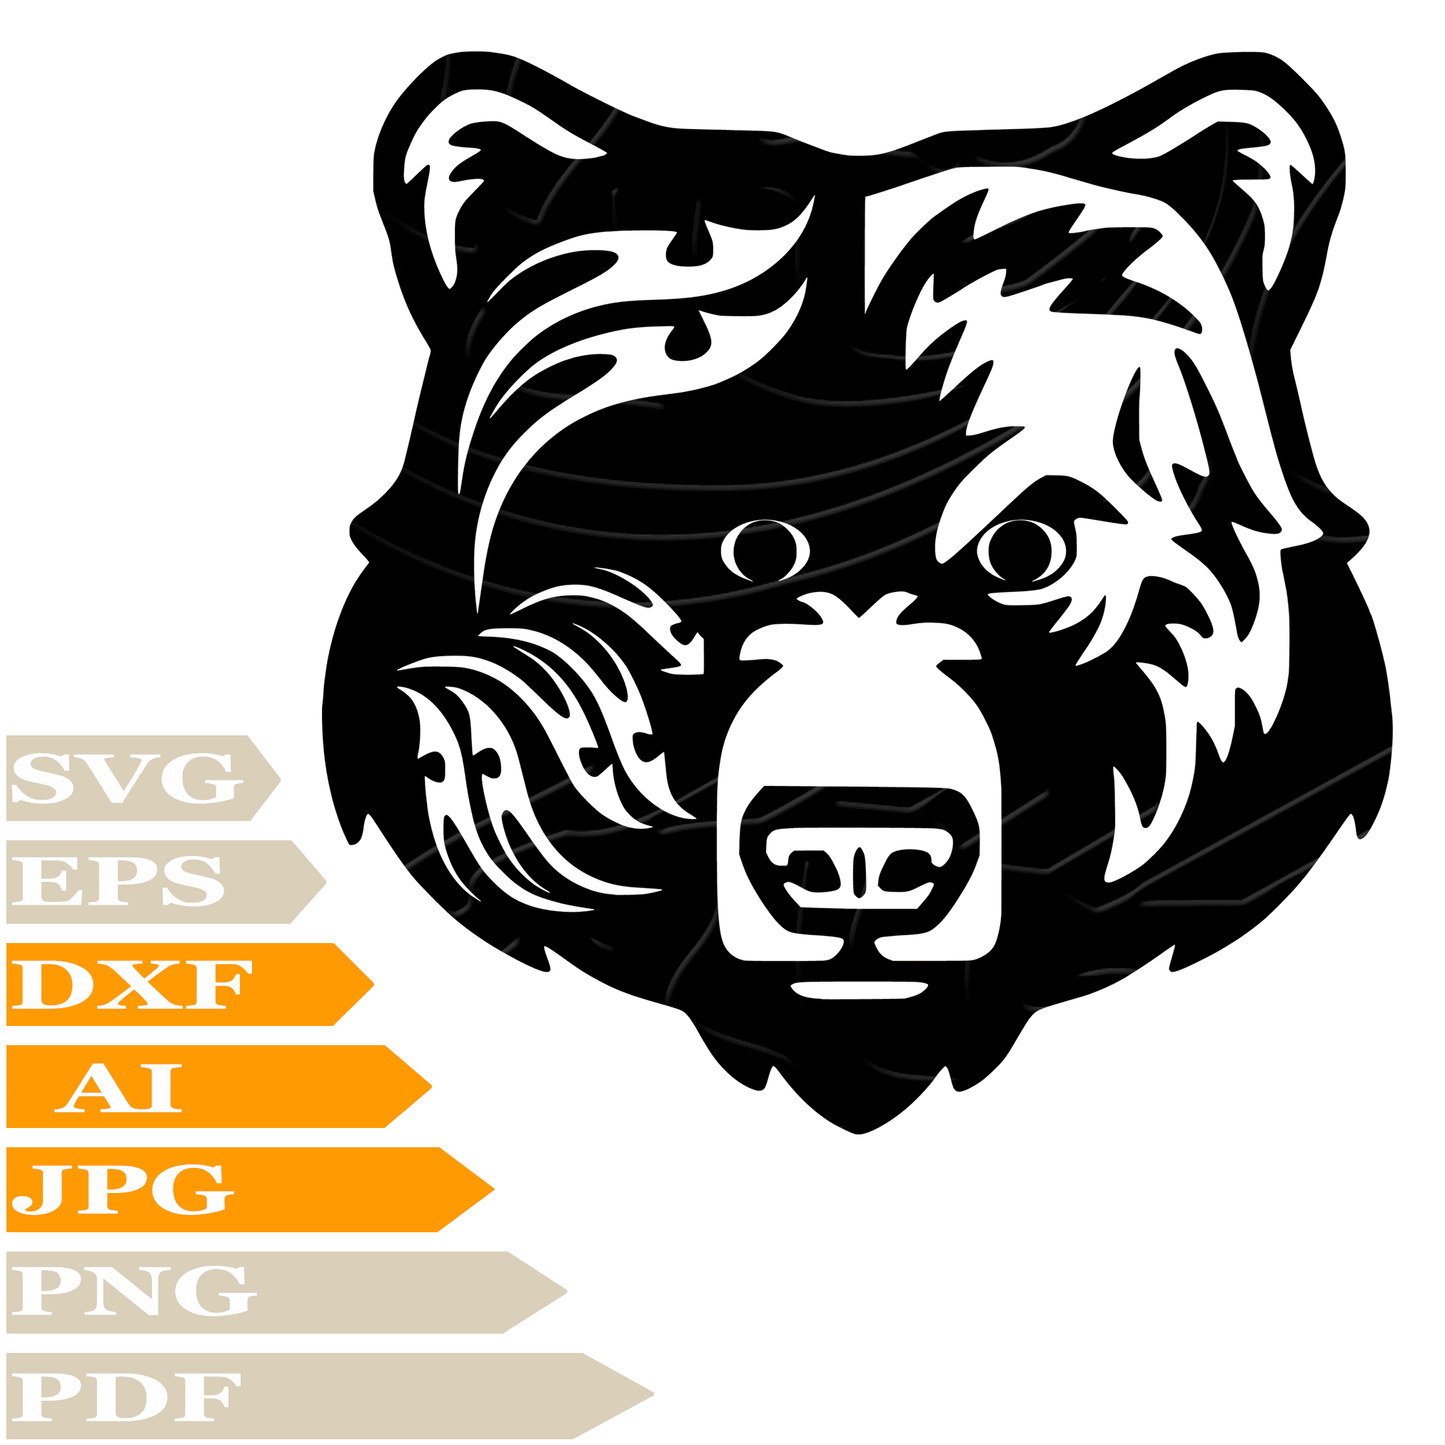 Bear ﻿SVG-Wild Bear Personalized SVG-Bear Face Tattoo Drawing SVG-Wild Bear Animals Vector Illustration-PNG-Decal-Cricut-Digital Files-Clip Art-Cut File-For Shirts-Silhouette